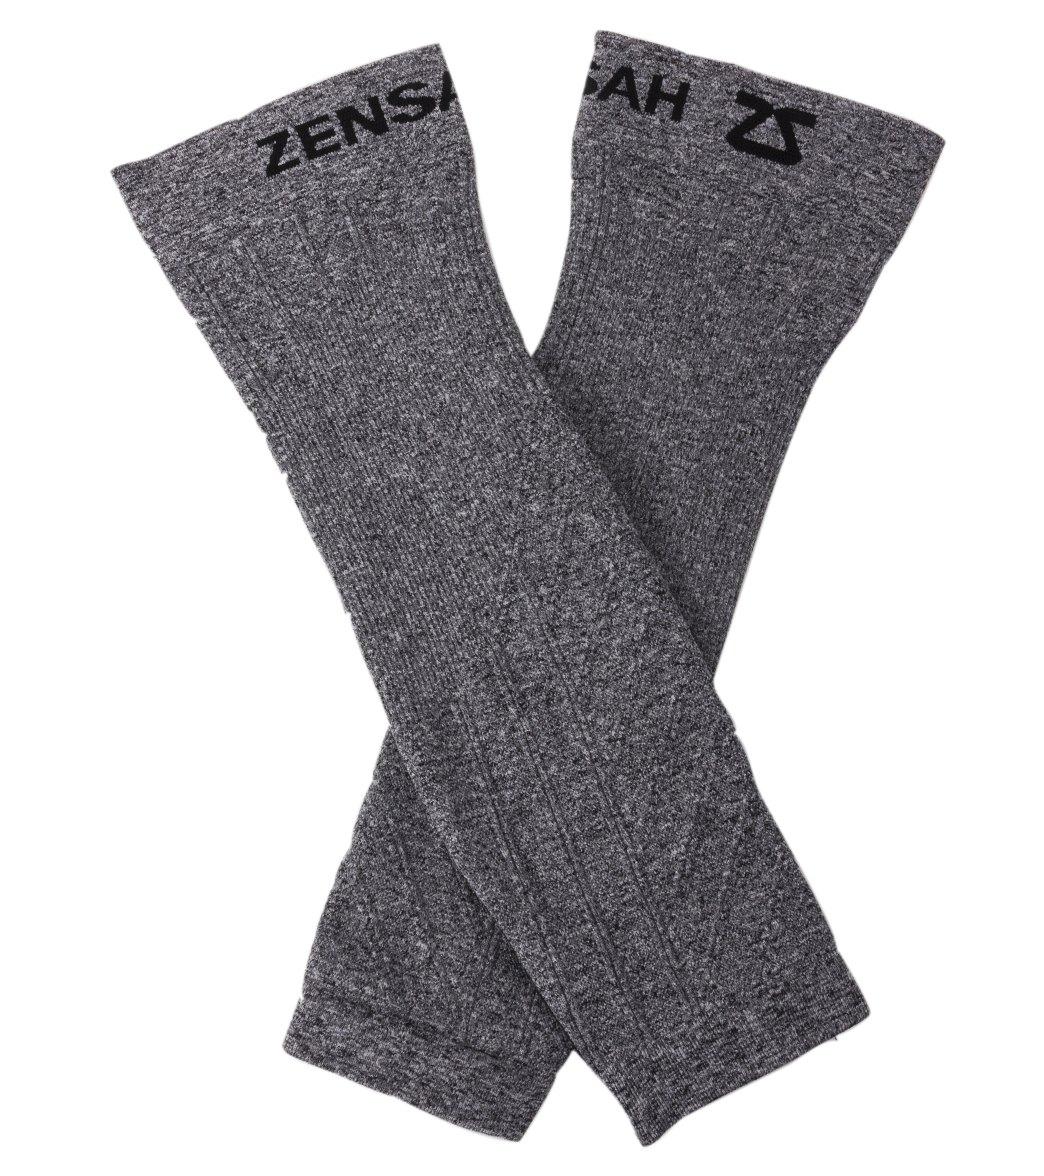 Zensah Compression Leg Sleeves Pair - Heather Grey X-Small/Small - Swimoutlet.com